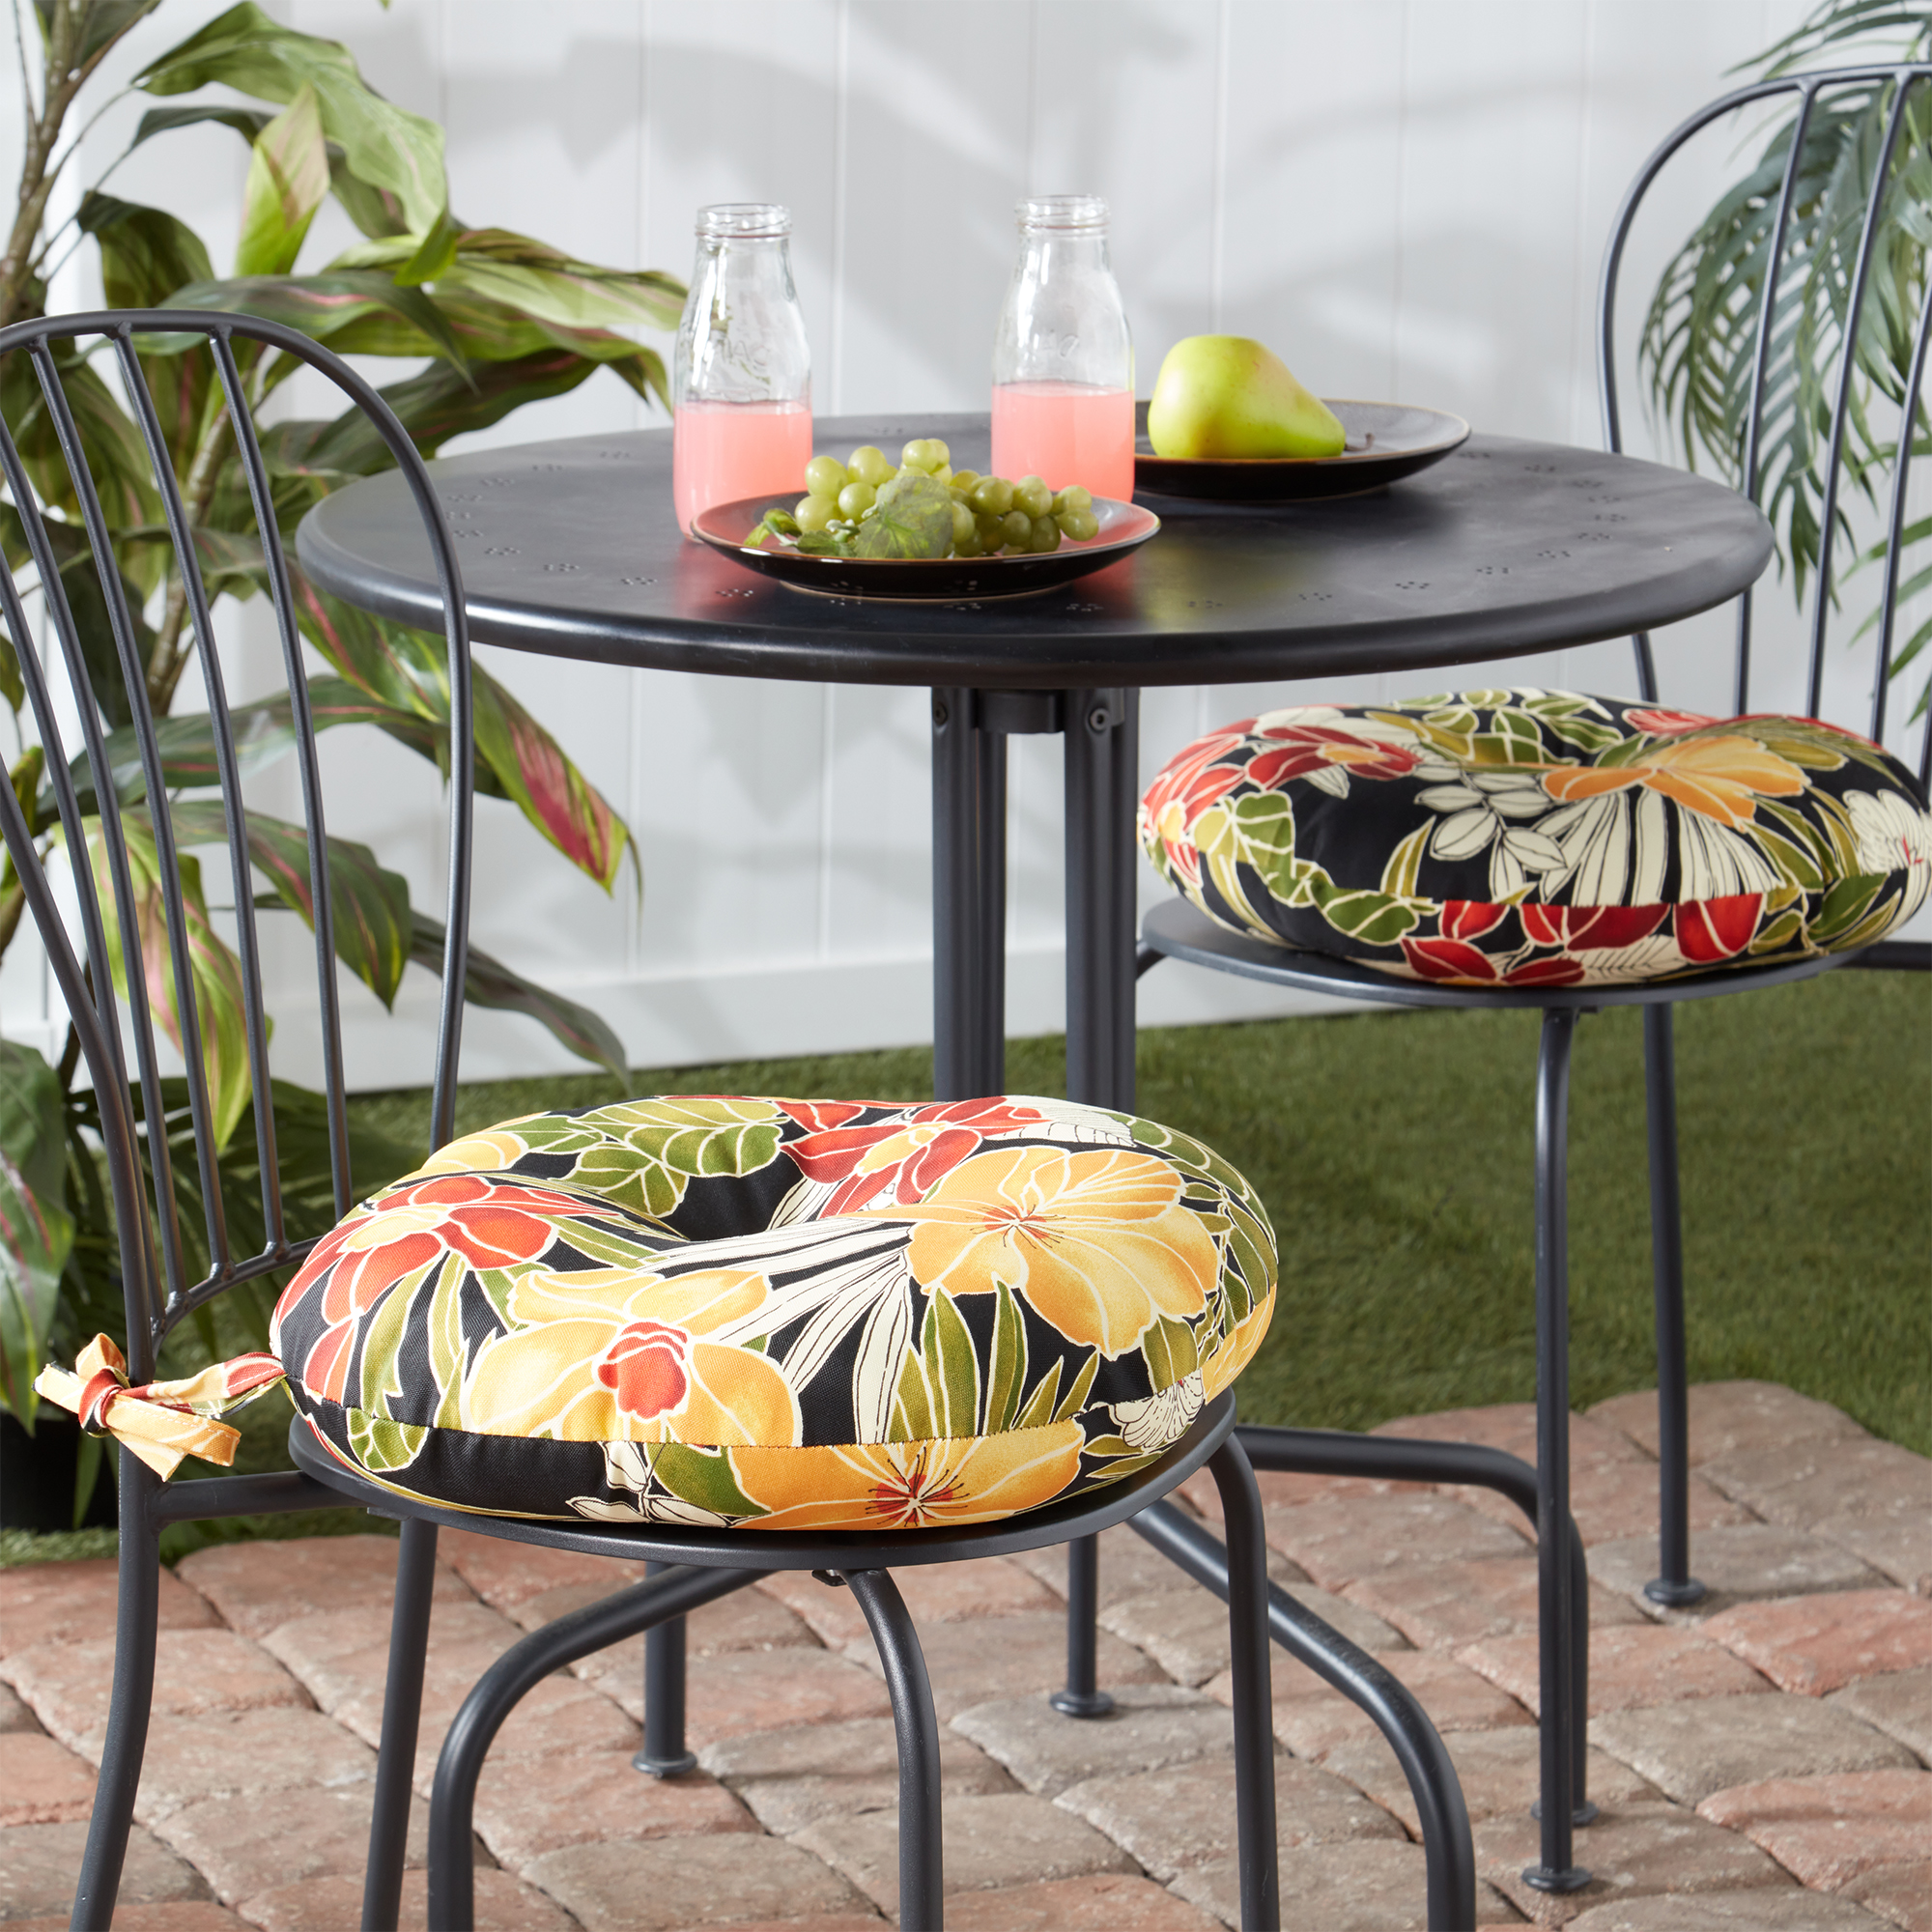 Greendale Home Fashions Aloha Black Floral 15 in. Round Outdoor Reversible Bistro Seat Cushion (Set of 2) - image 2 of 5